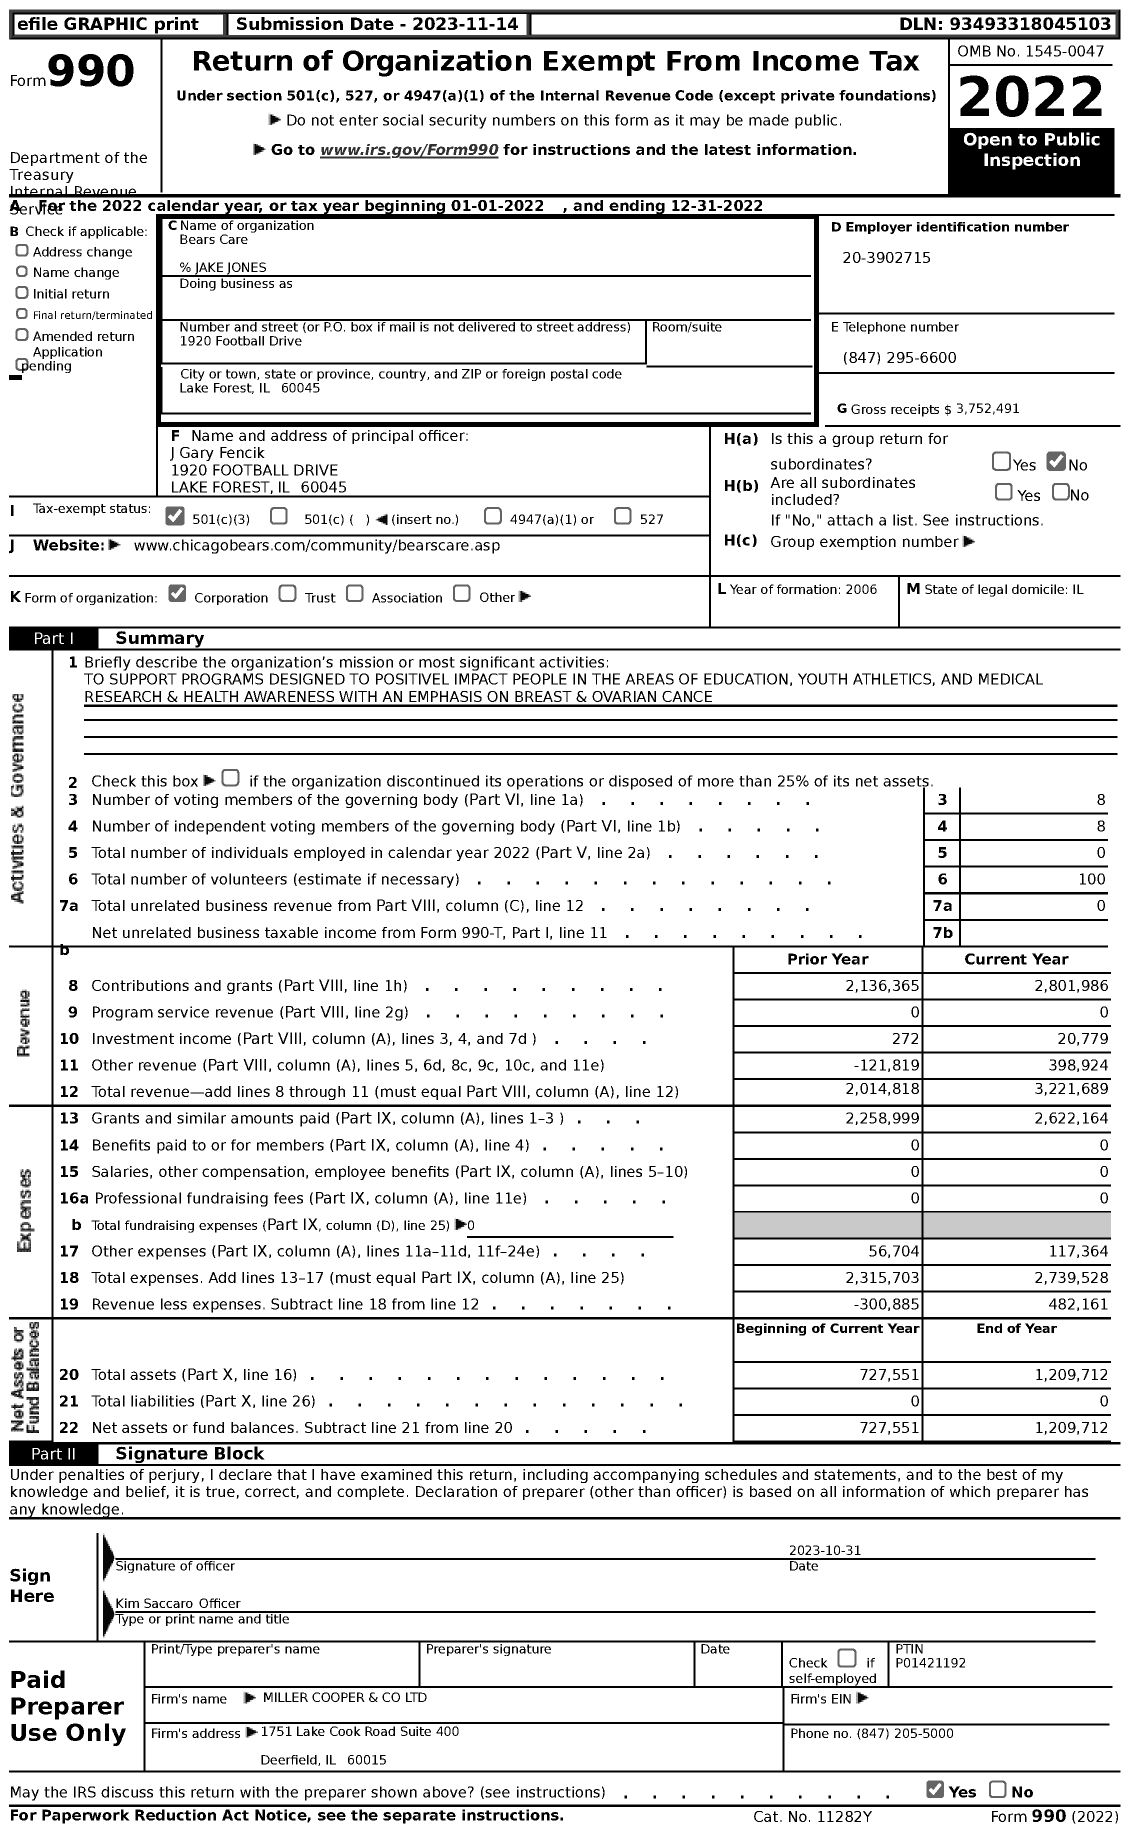 Image of first page of 2022 Form 990 for Bears Care